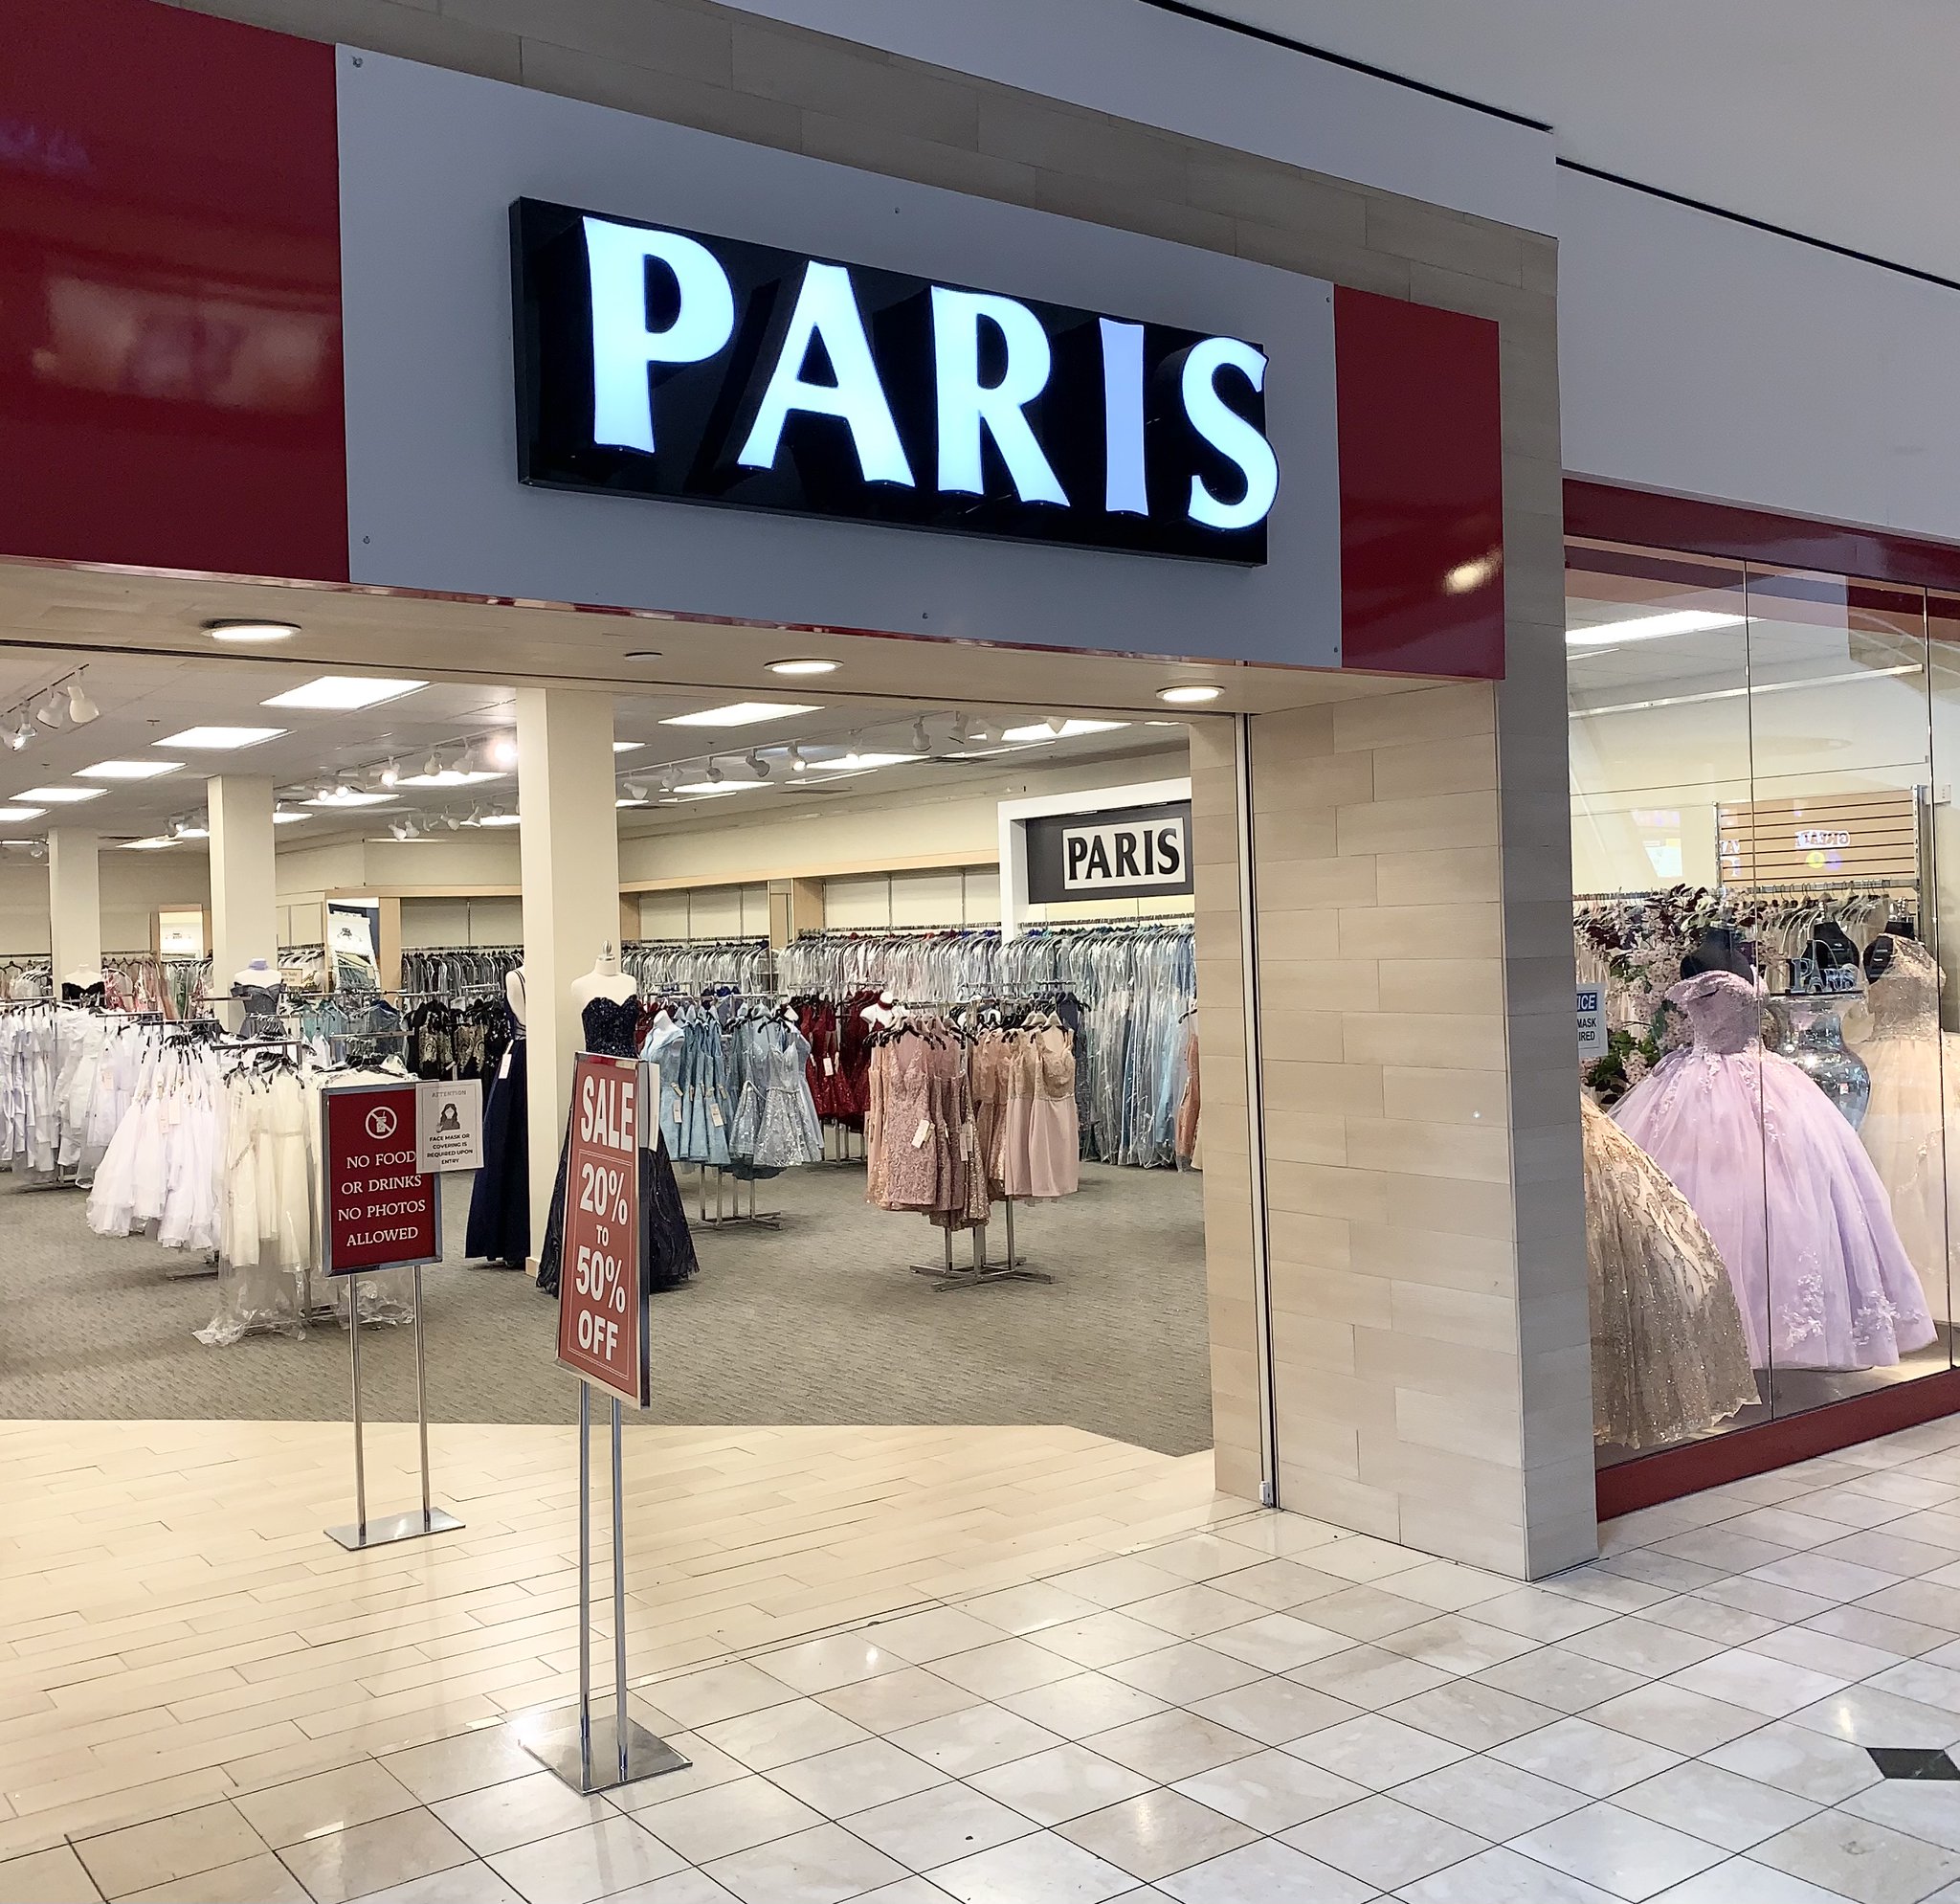 Town Center at Cobb on X: Paris is now open in a new location, on the  lower level near JCPenney and across from Auntie Anne's. Visit their store  for all your formal